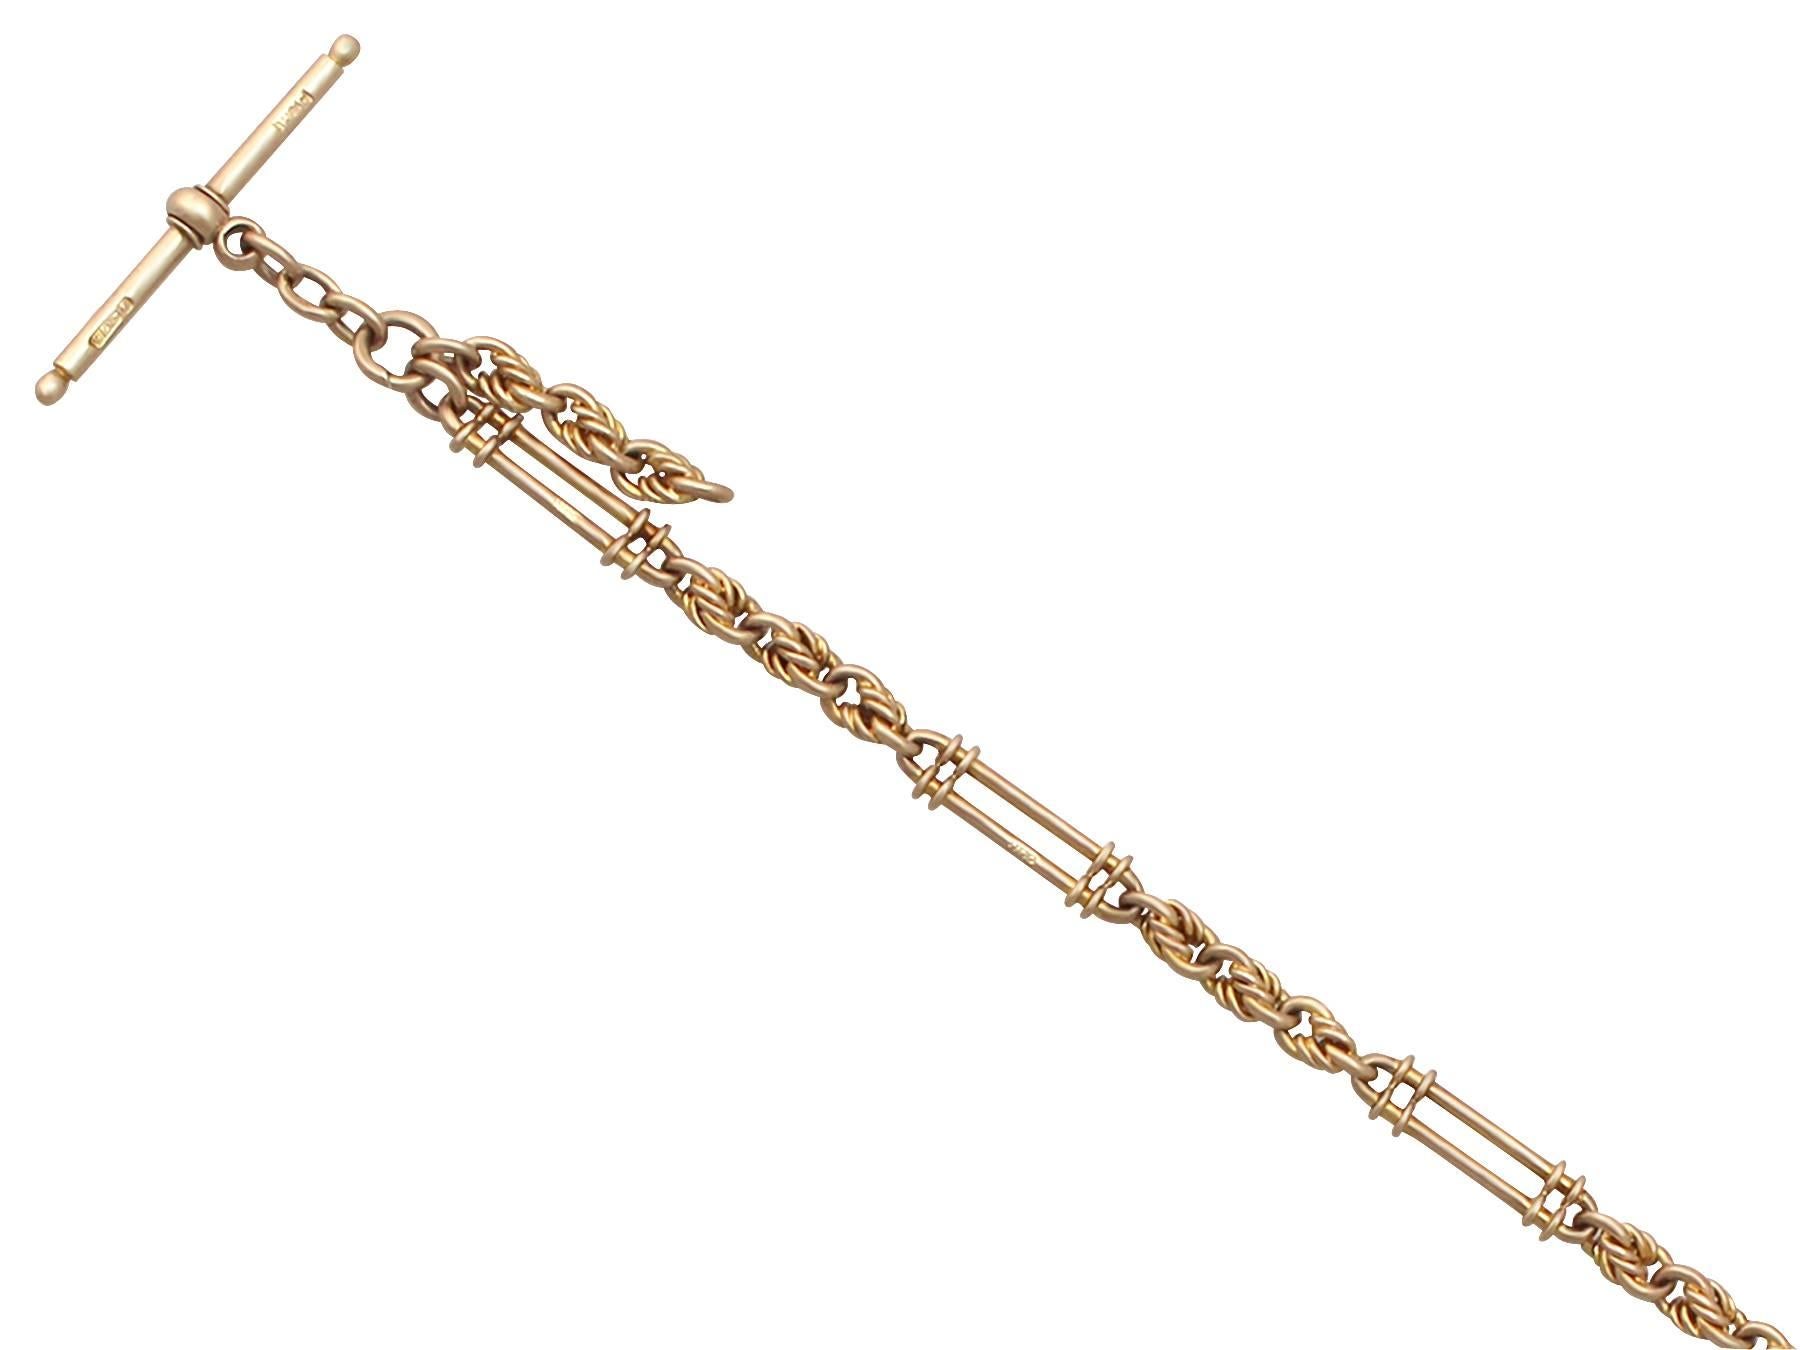 A fine and impressive antique 9 karat yellow gold Albert watch chain; part of our diverse antique jewelry and estate jewelry collections

This fine and impressive fancy watch chain has been crafted in 9k yellow gold.

The impressive figaro style